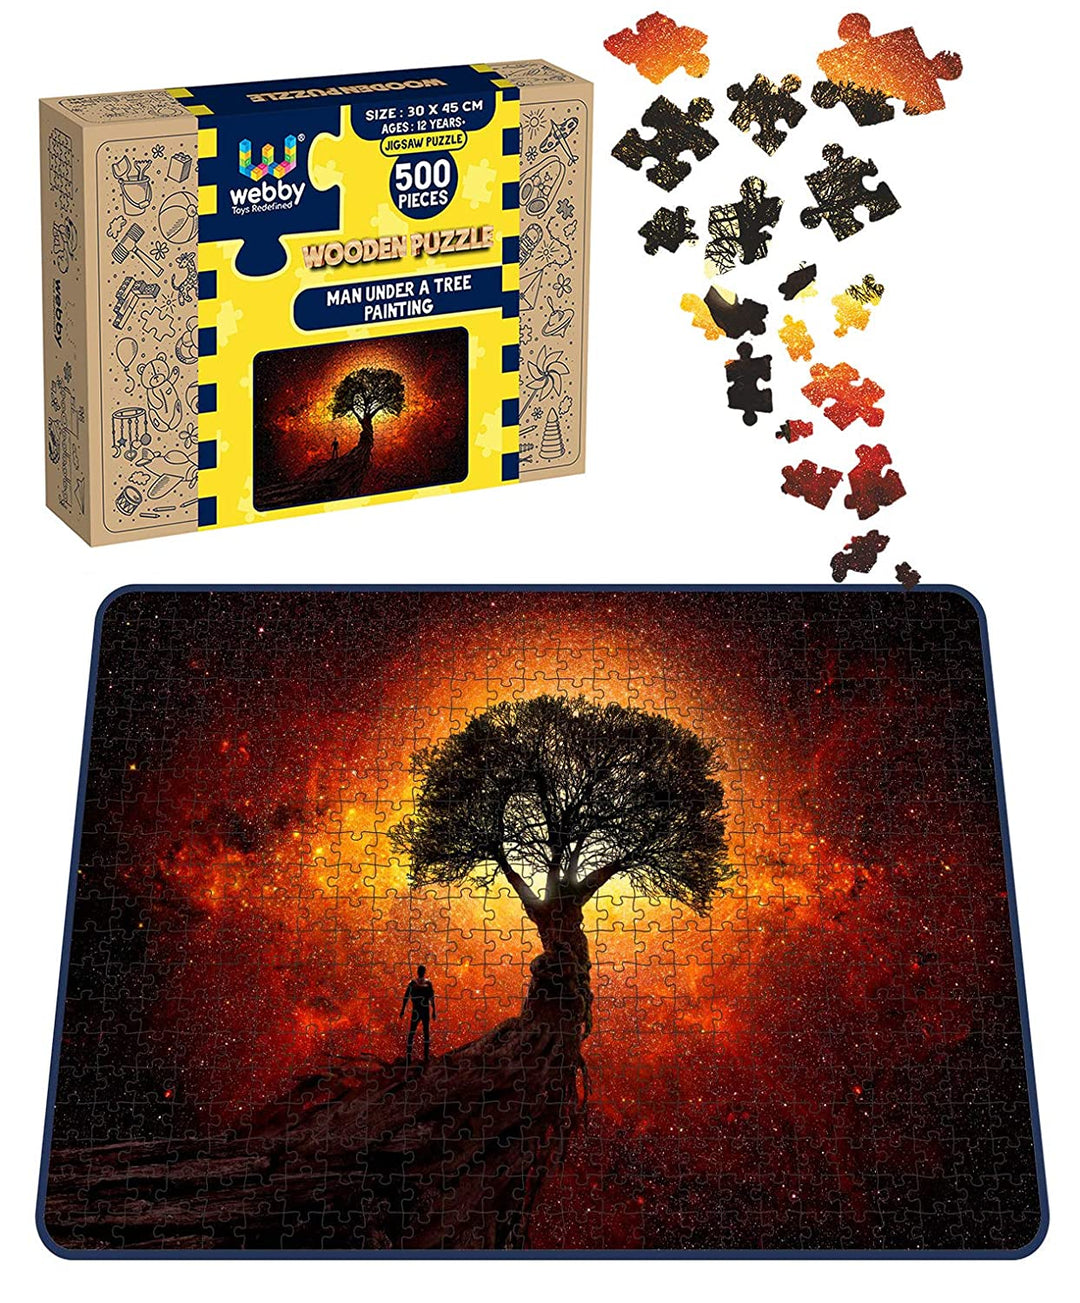 Webby Man Under a Tree Painting Wooden Jigsaw Puzzle, 500 pieces